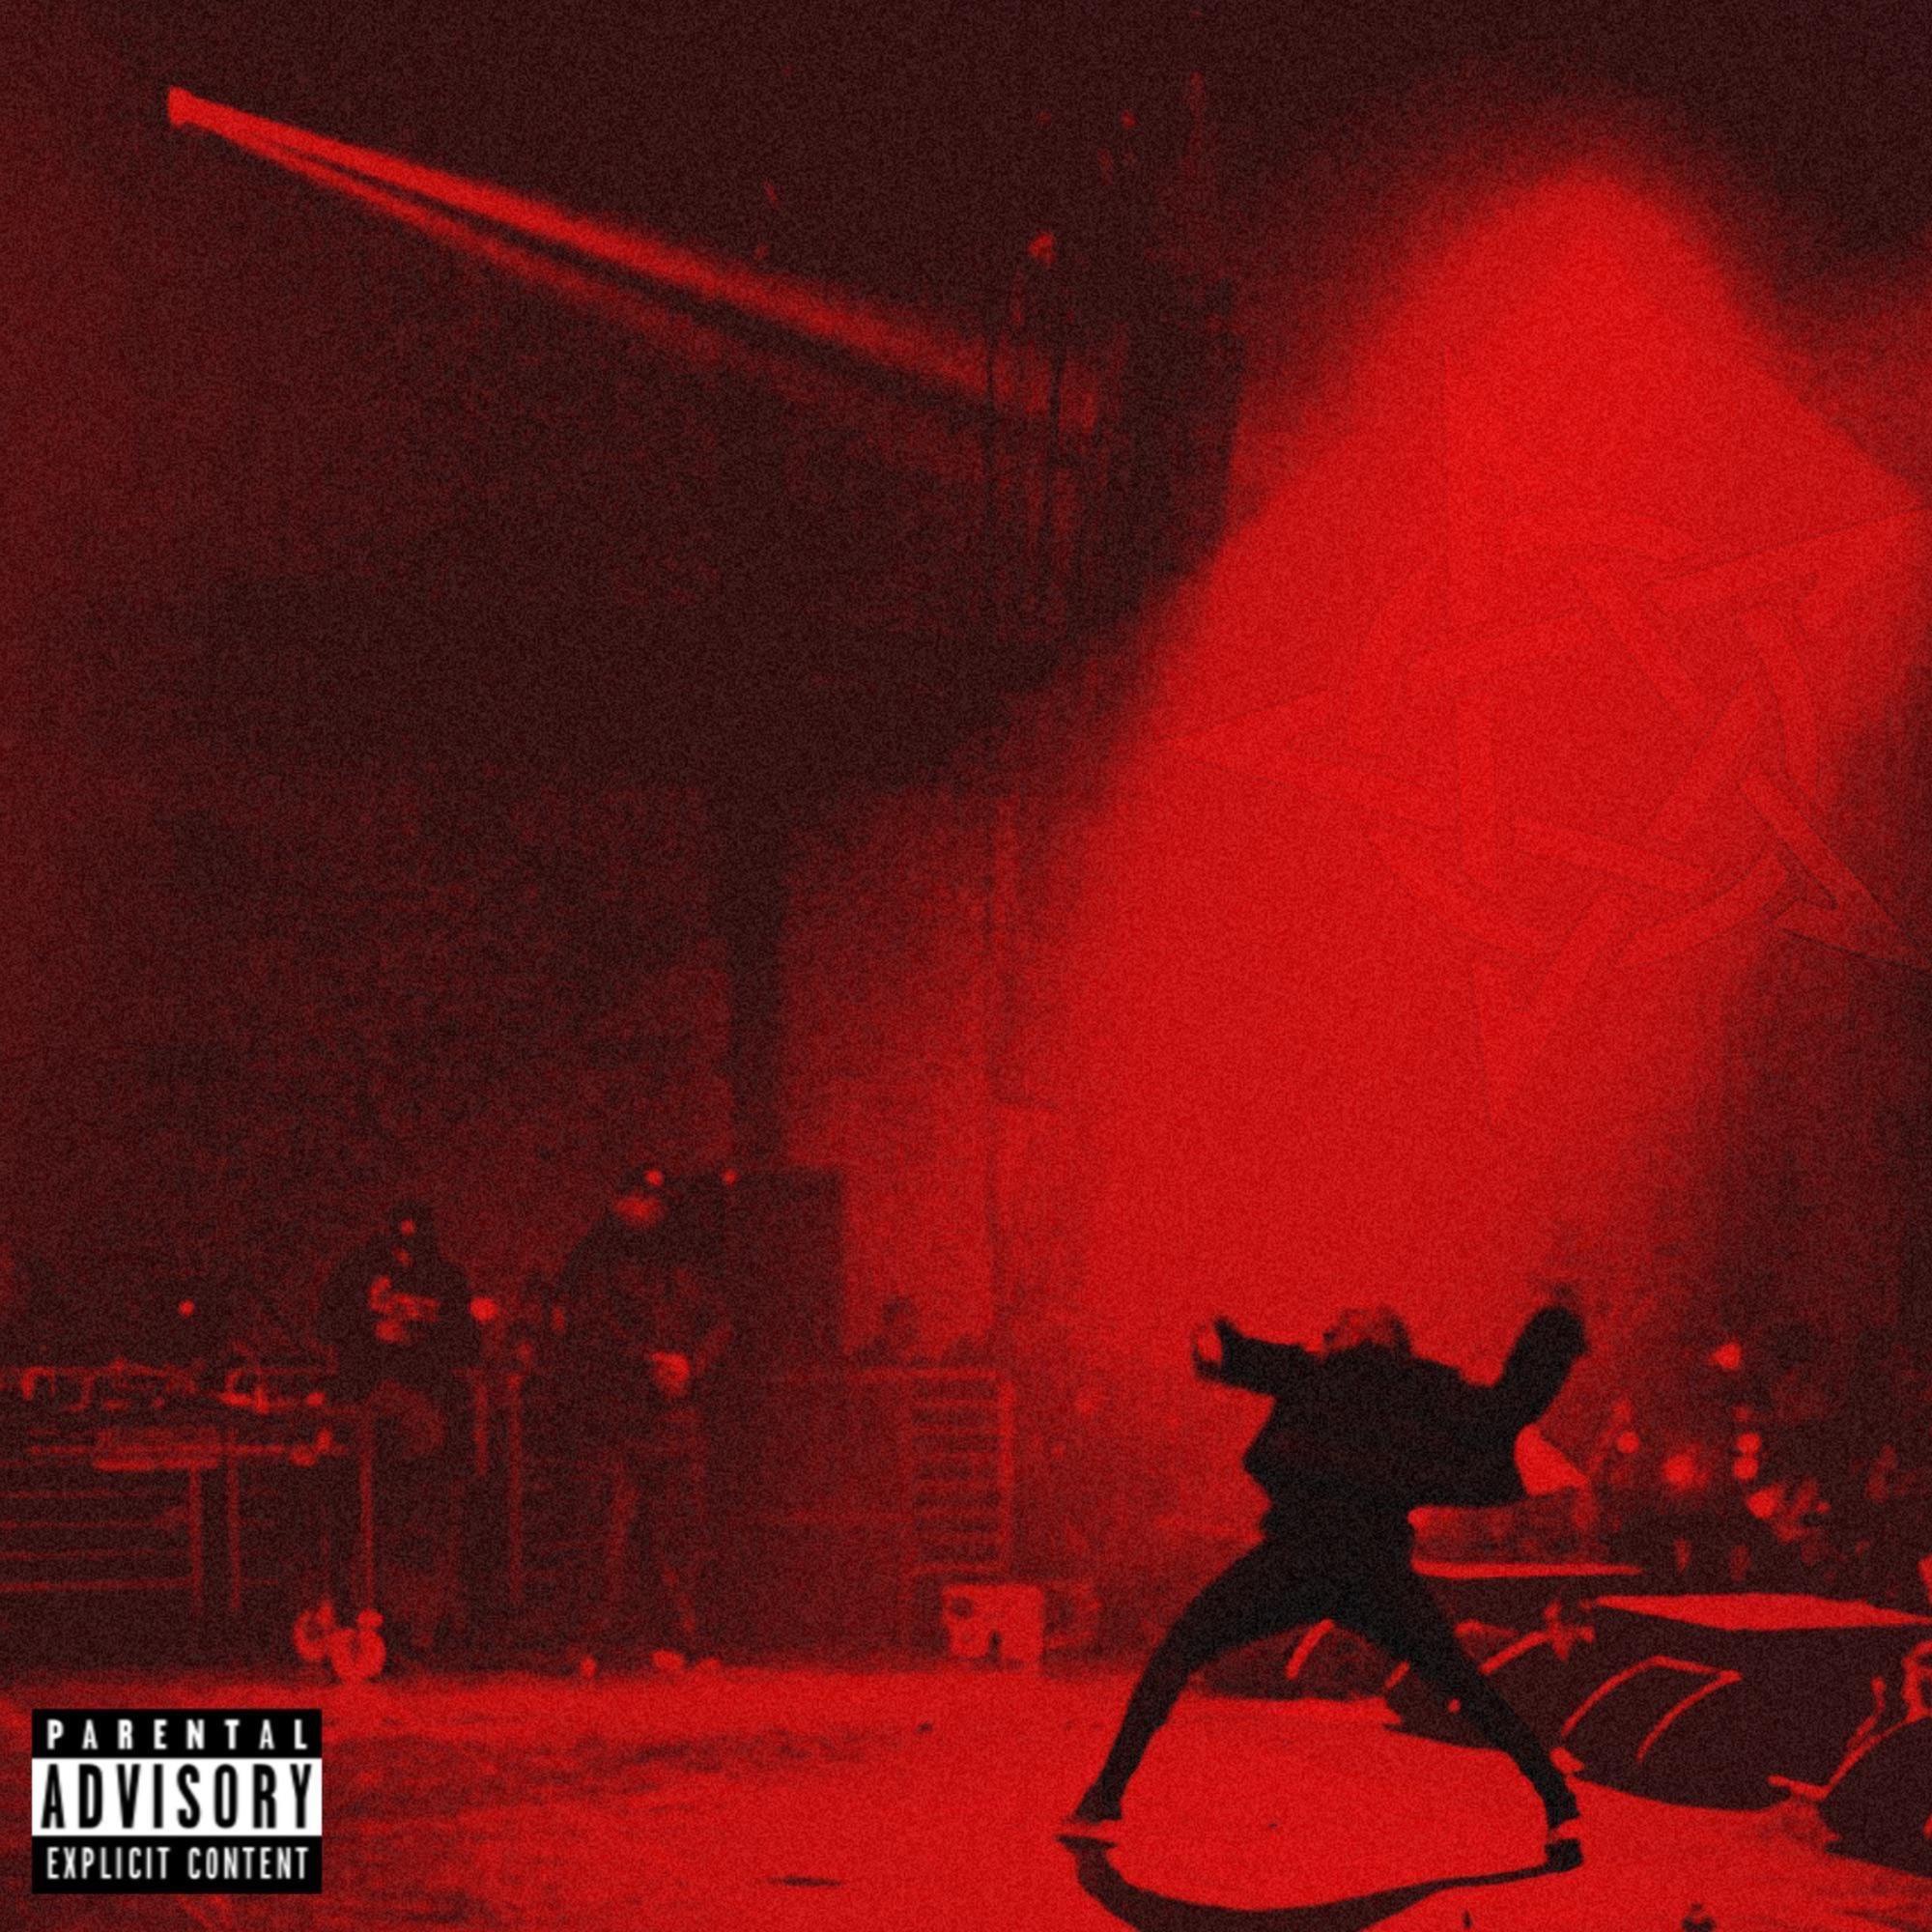 Playboi Carti Whole Lotta Red Review By Mysterybfdi Album Of The Year